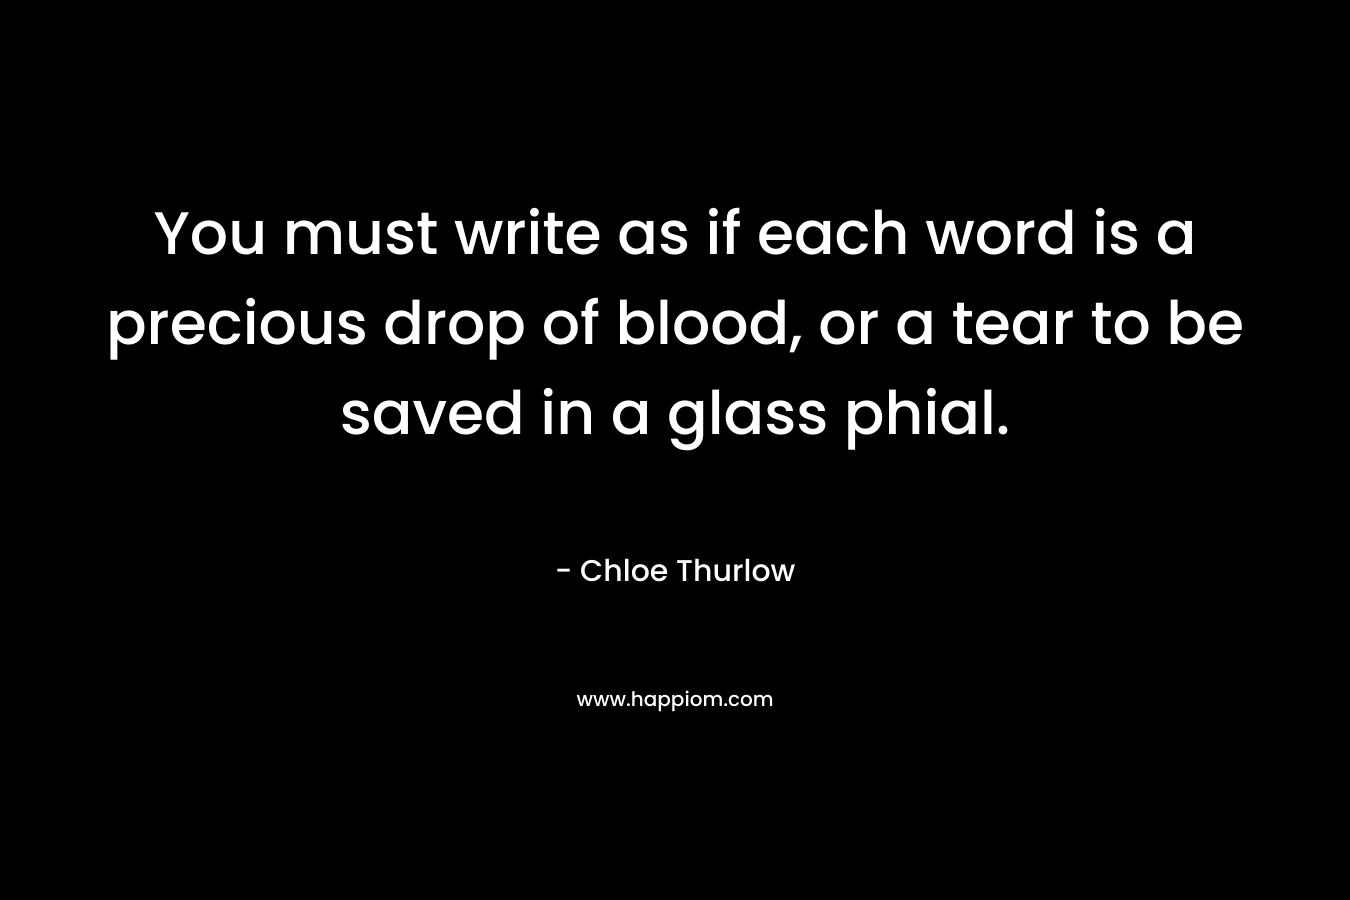 You must write as if each word is a precious drop of blood, or a tear to be saved in a glass phial. – Chloe Thurlow